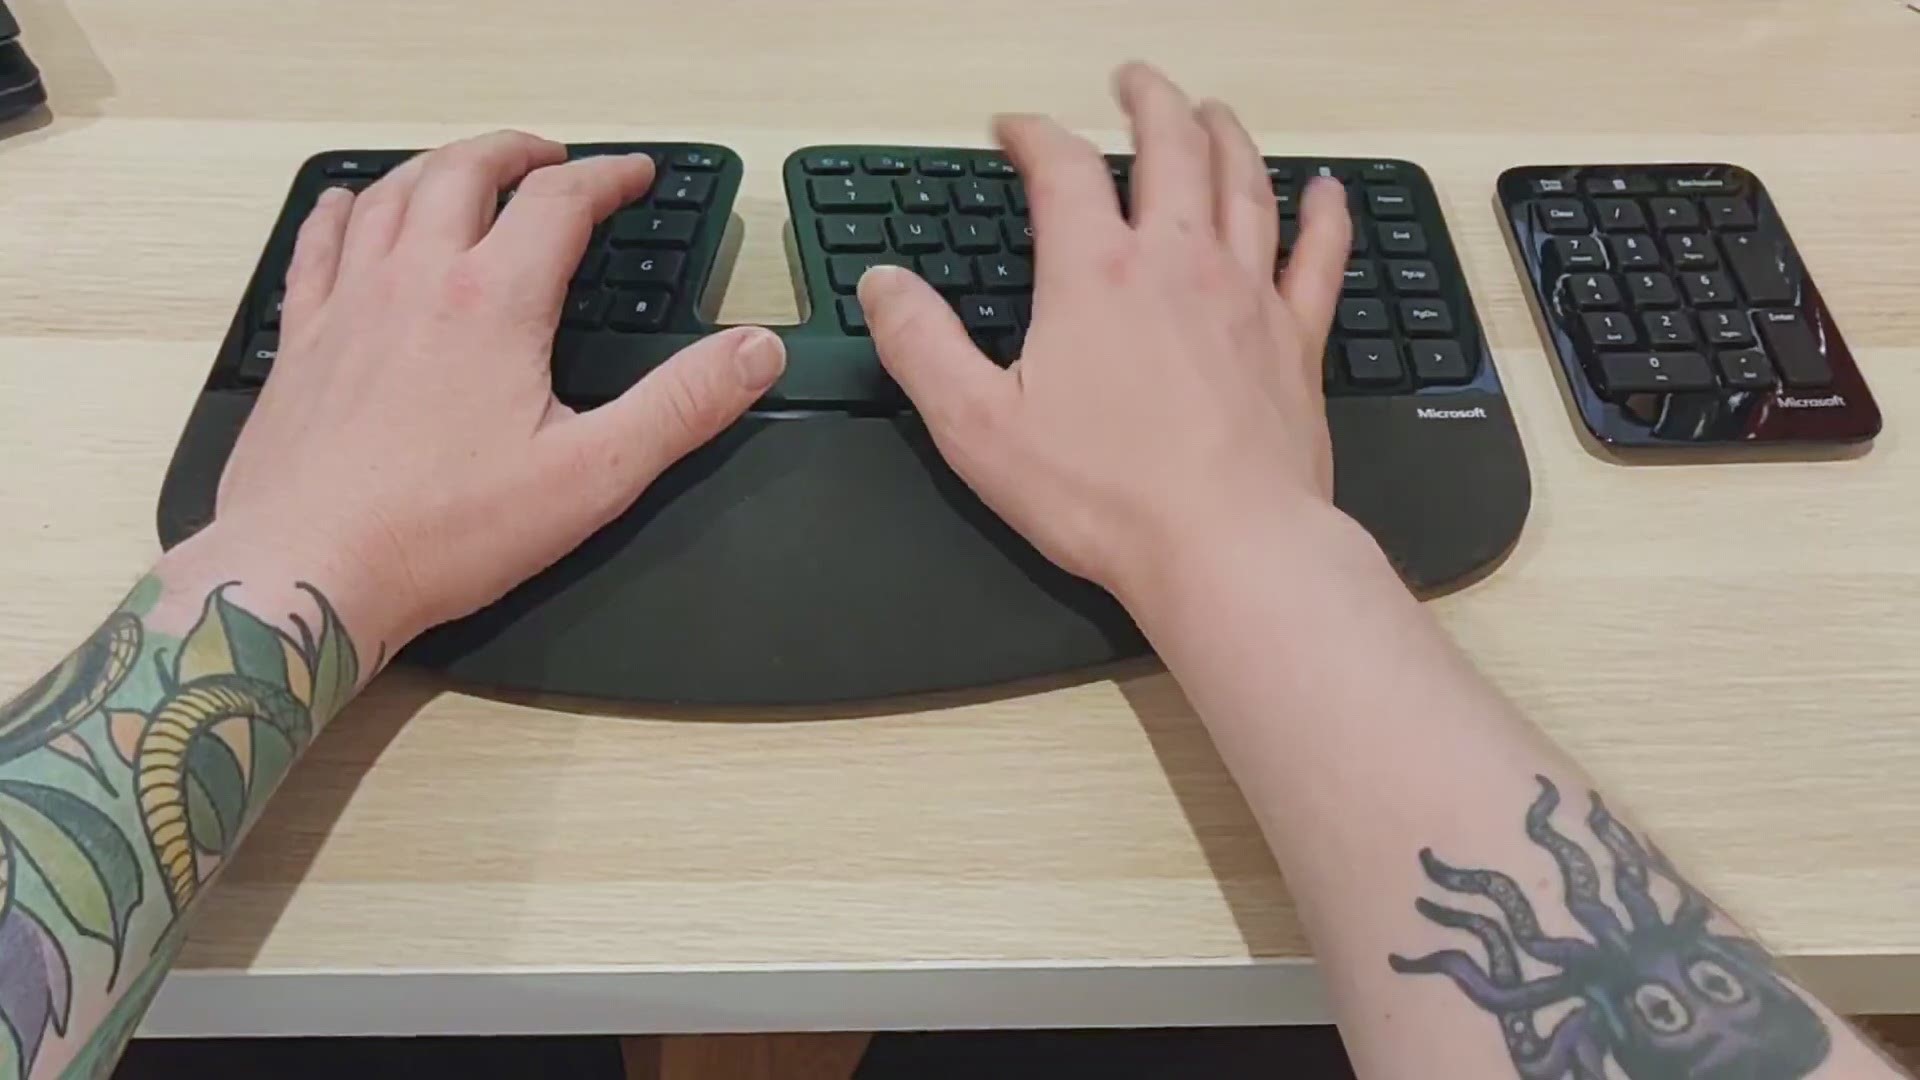 Consumer Reports recently tested ergonomic keyboards and mice, and reveals which ones did best.